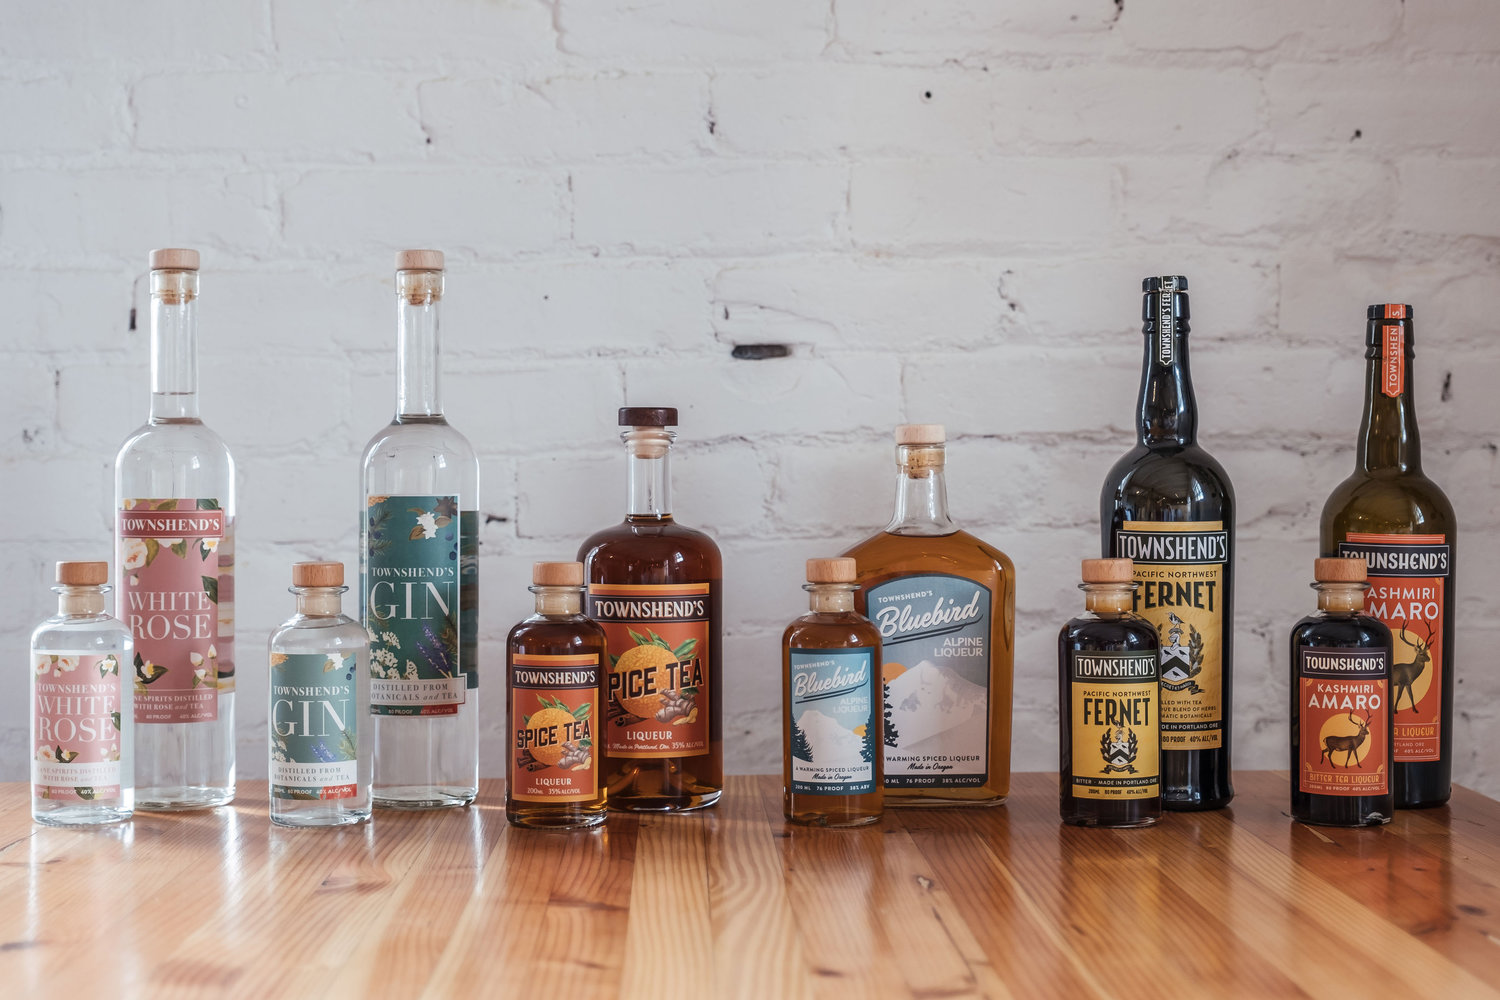 The impressive collection of craft spirits from Townshend Distillery in Portland, OR